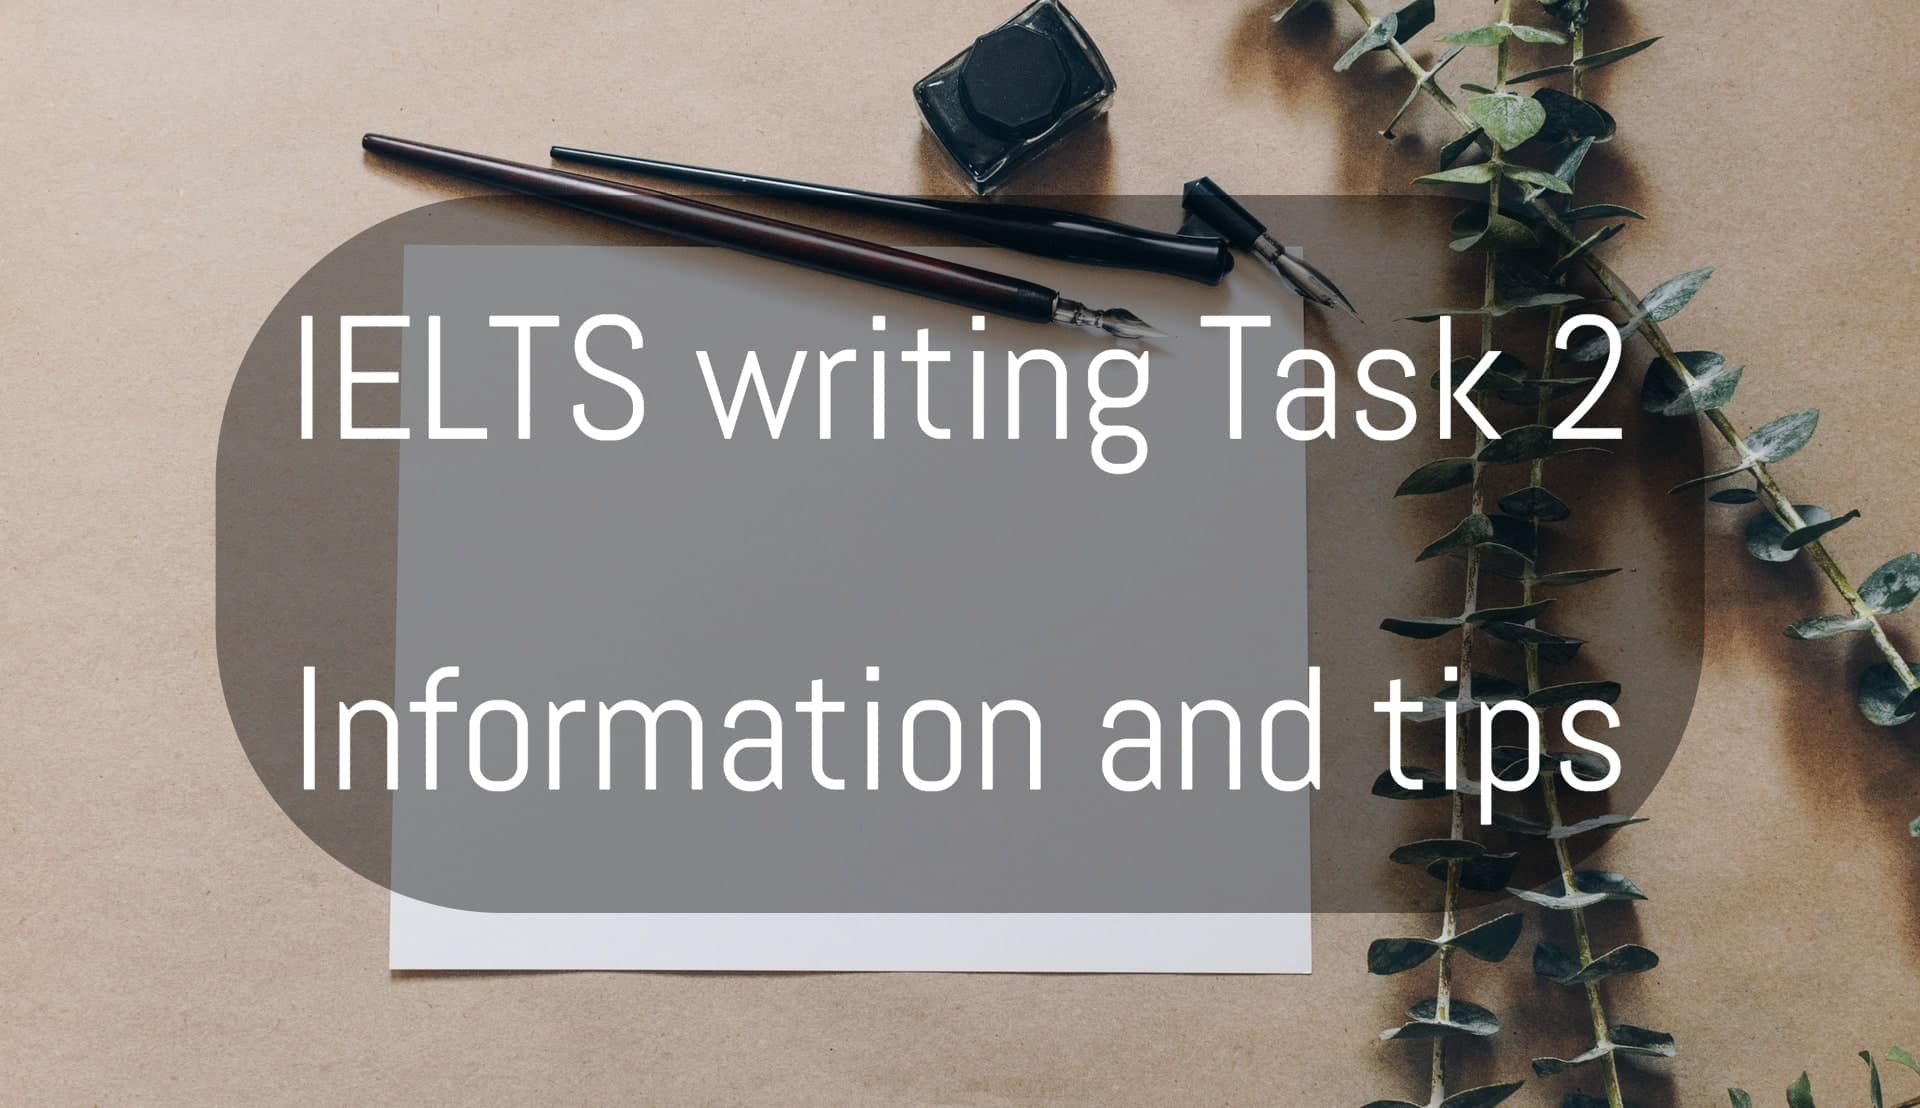 IELTS writing task 2 info and tips